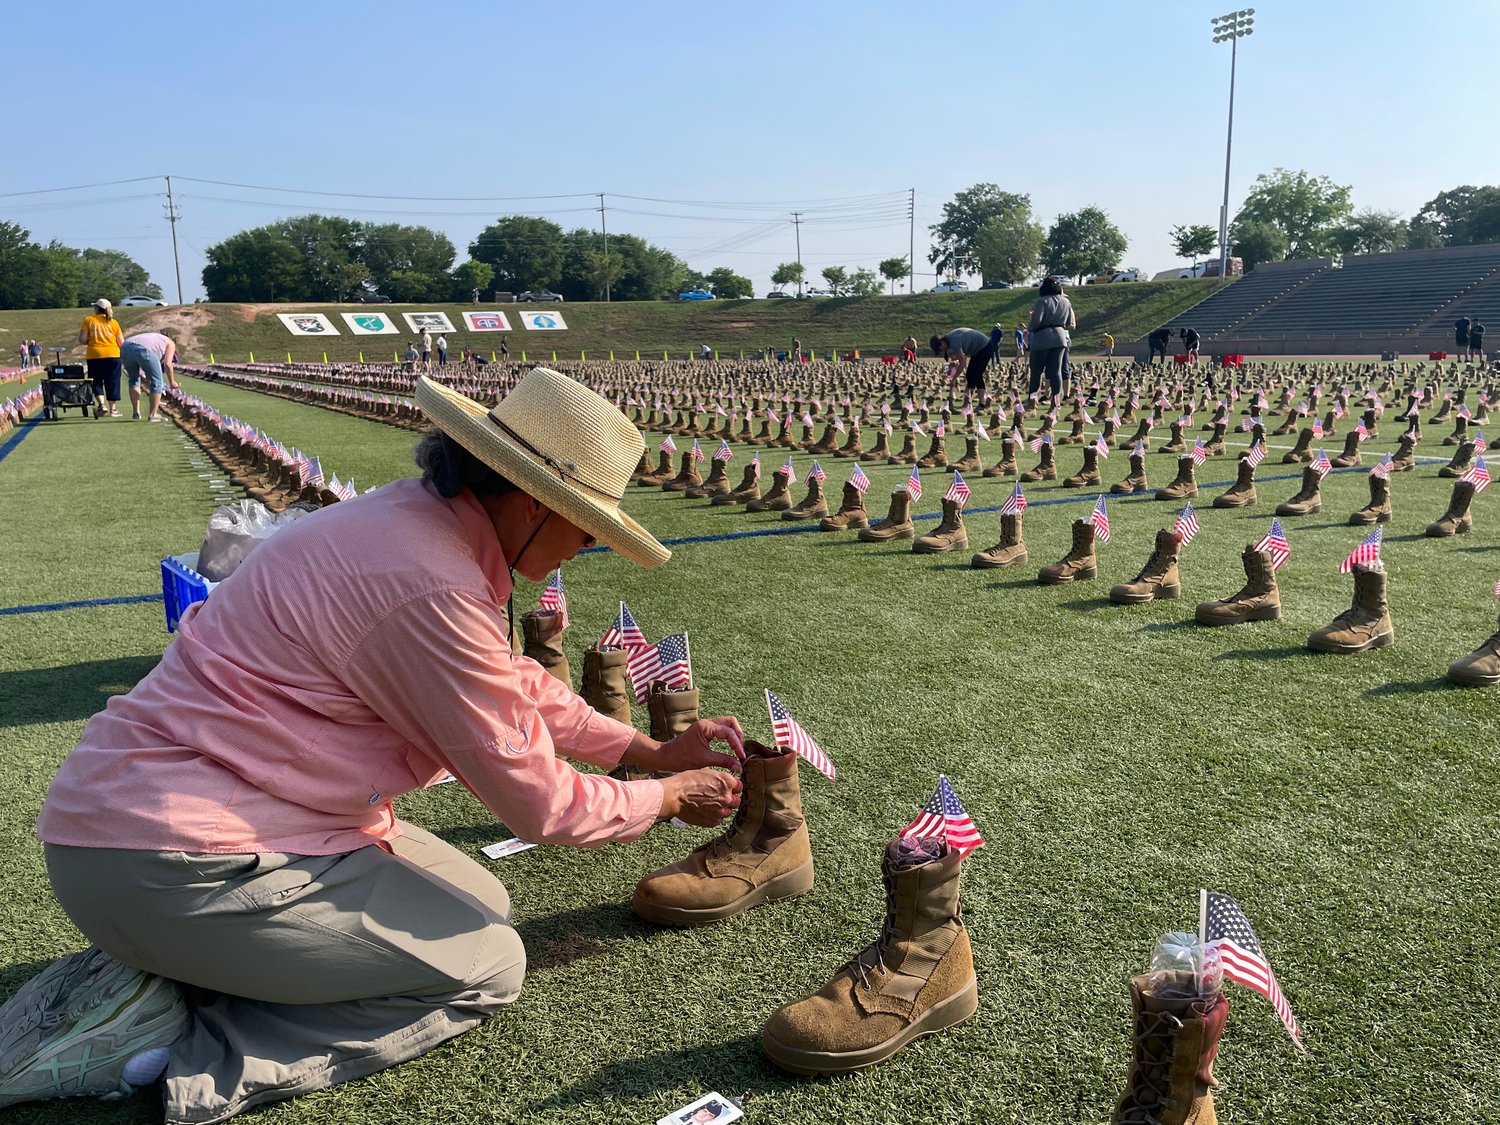 Martha Brown helps set up the display Friday at Hedrick Stadium on Fort Bragg. 'I feel honored that I was chosen to be one of the volunteers to kneel and put the tags on the boots,' said Brown, who moved to Fayetteville 30 years ago and now works for Army Community Services.